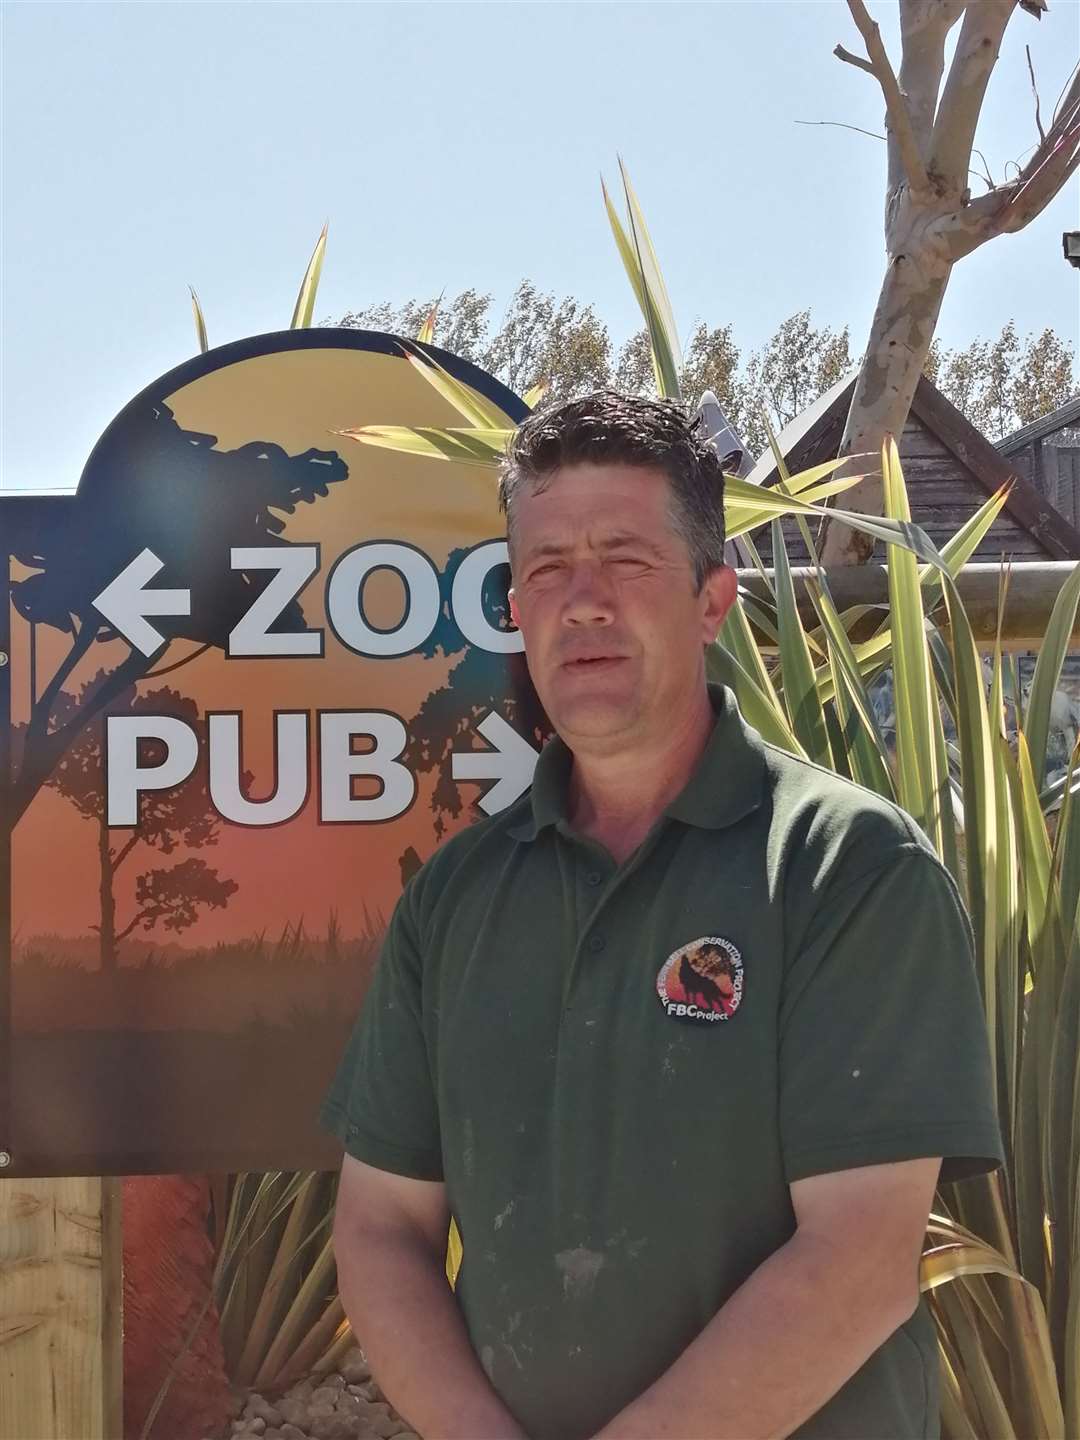 Andy Cowell, owner of The Fenn Bell Zoo and pub in St Mary Hoo